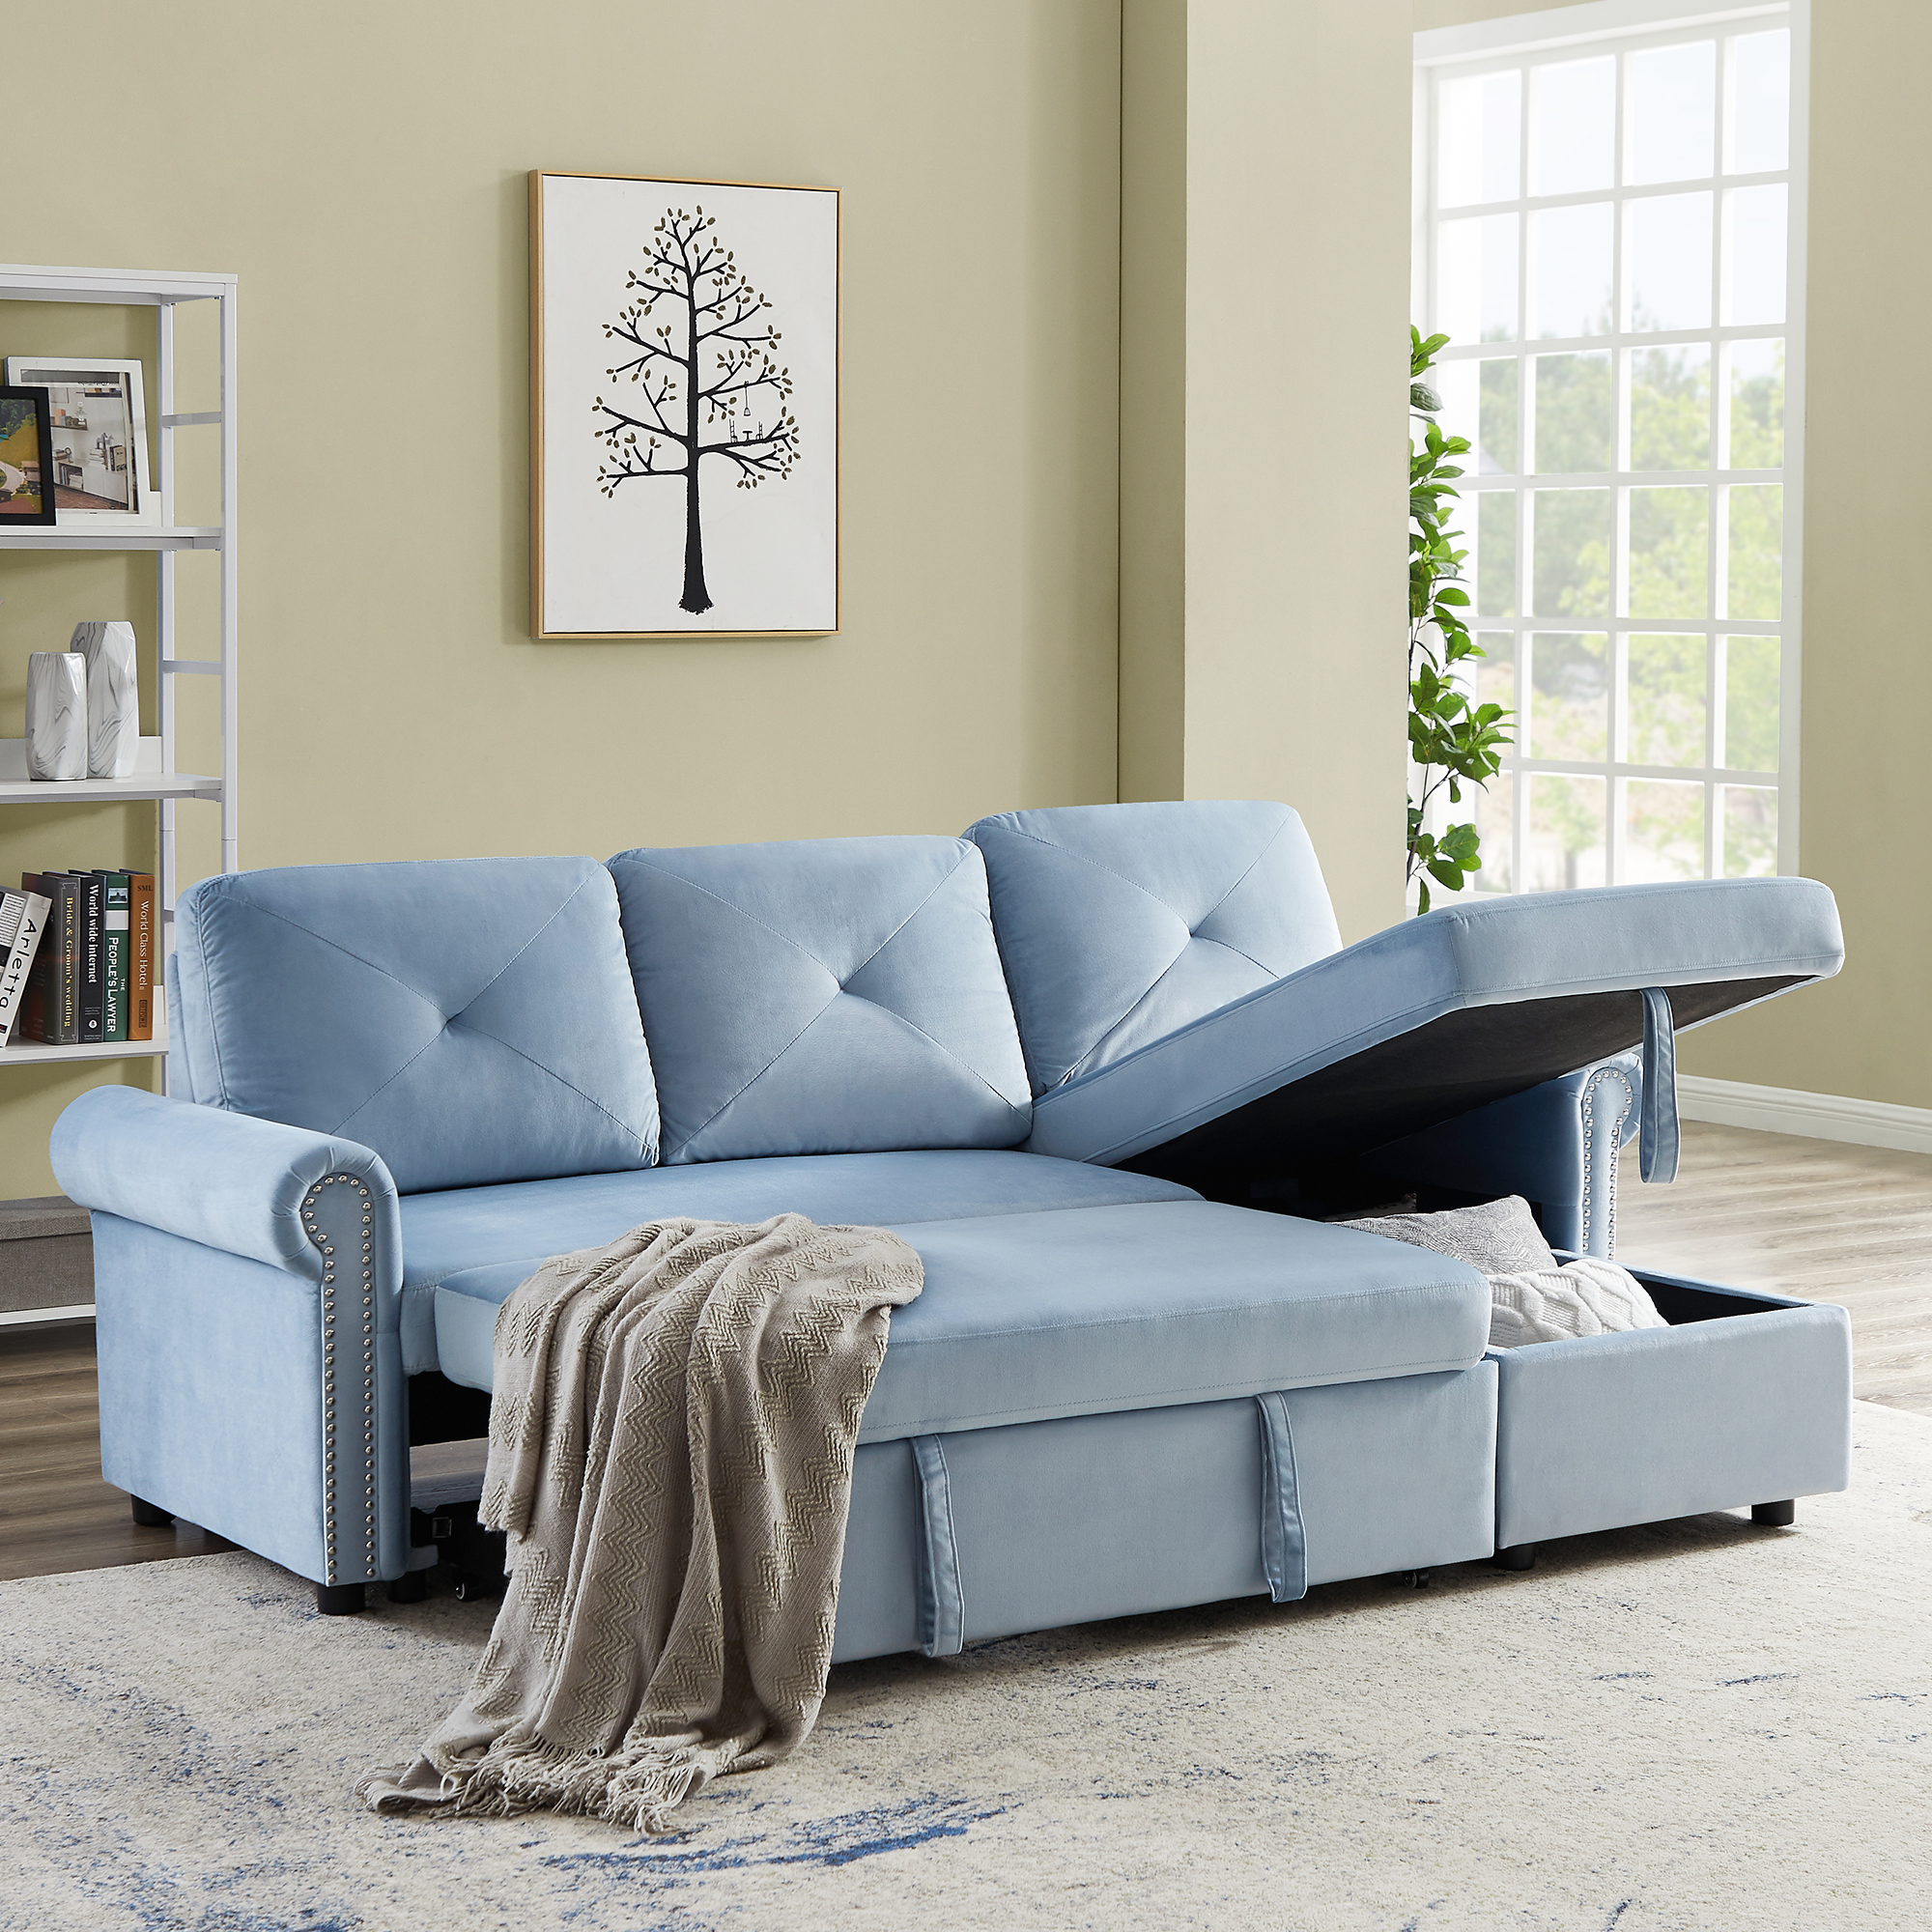 3-Seater L-Shape Corner Couch with Storage Chaise, Blue - SG000345AAA